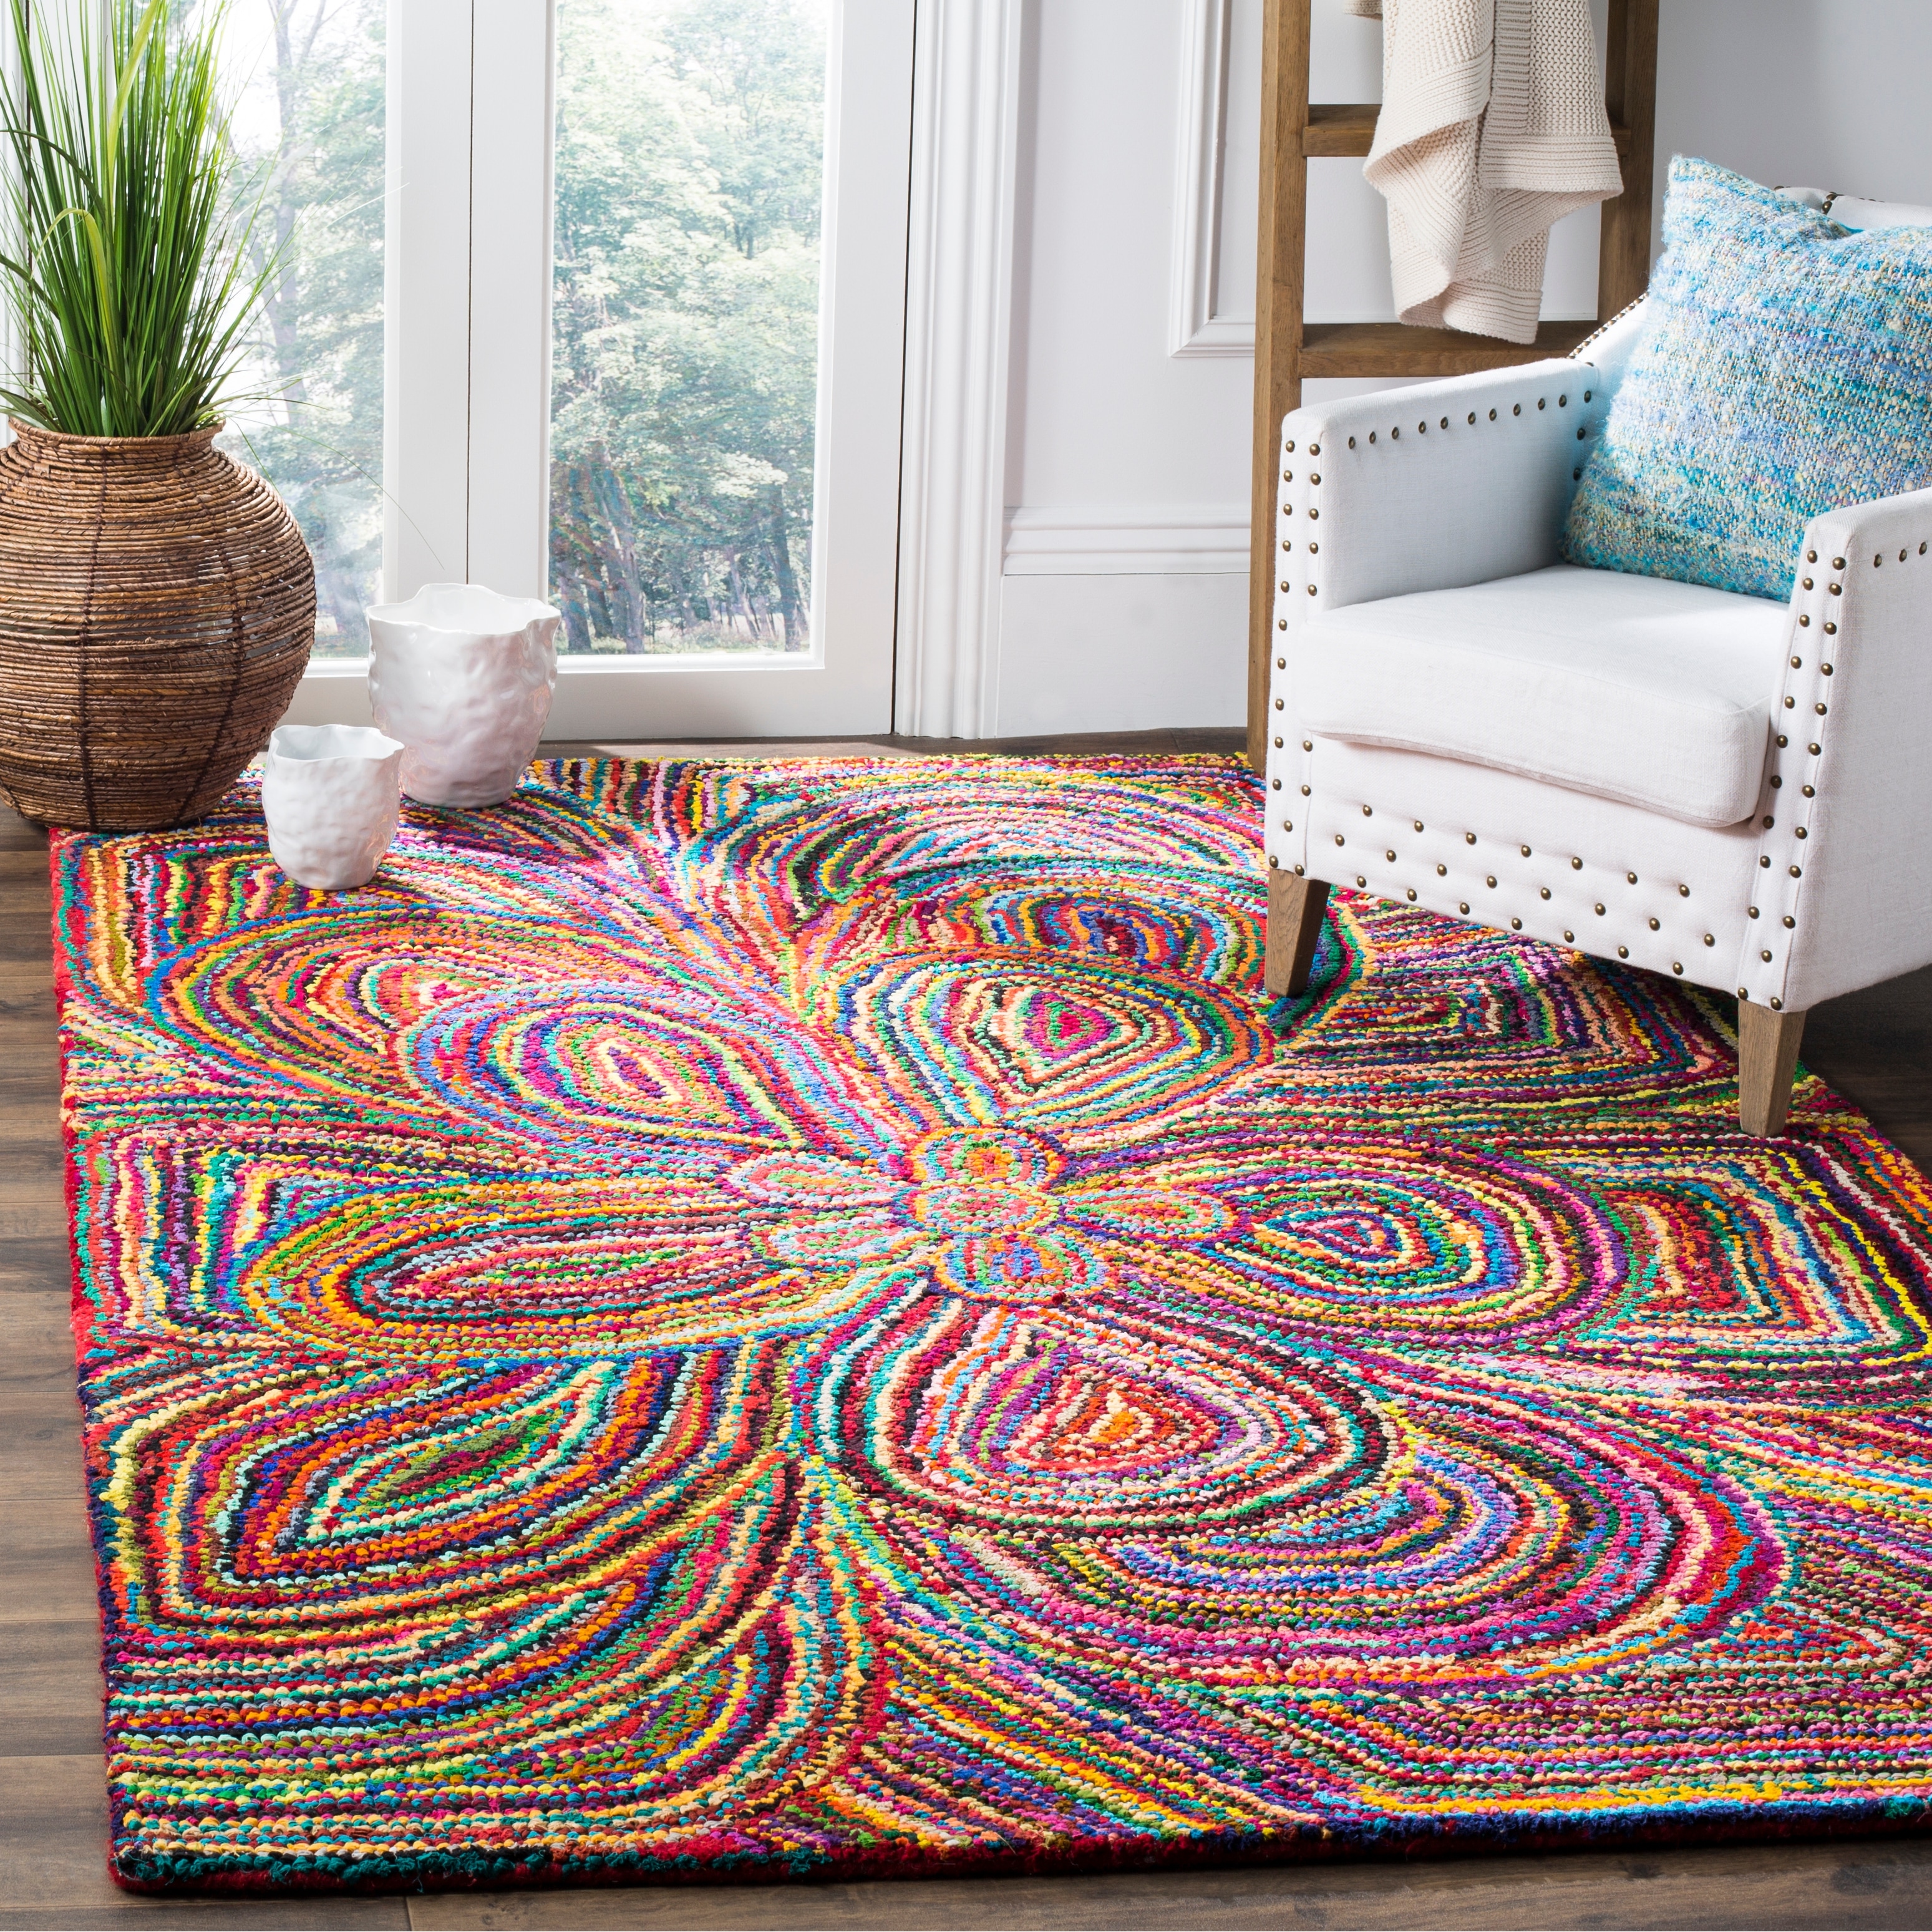 https://ak1.ostkcdn.com/images/products/is/images/direct/a294650b5fe4db6bd9abcf77ce4d22d489d2ab3b/SAFAVIEH-Handmade-Nantucket-Jabina-Contemporary-Cotton-Rug.jpg